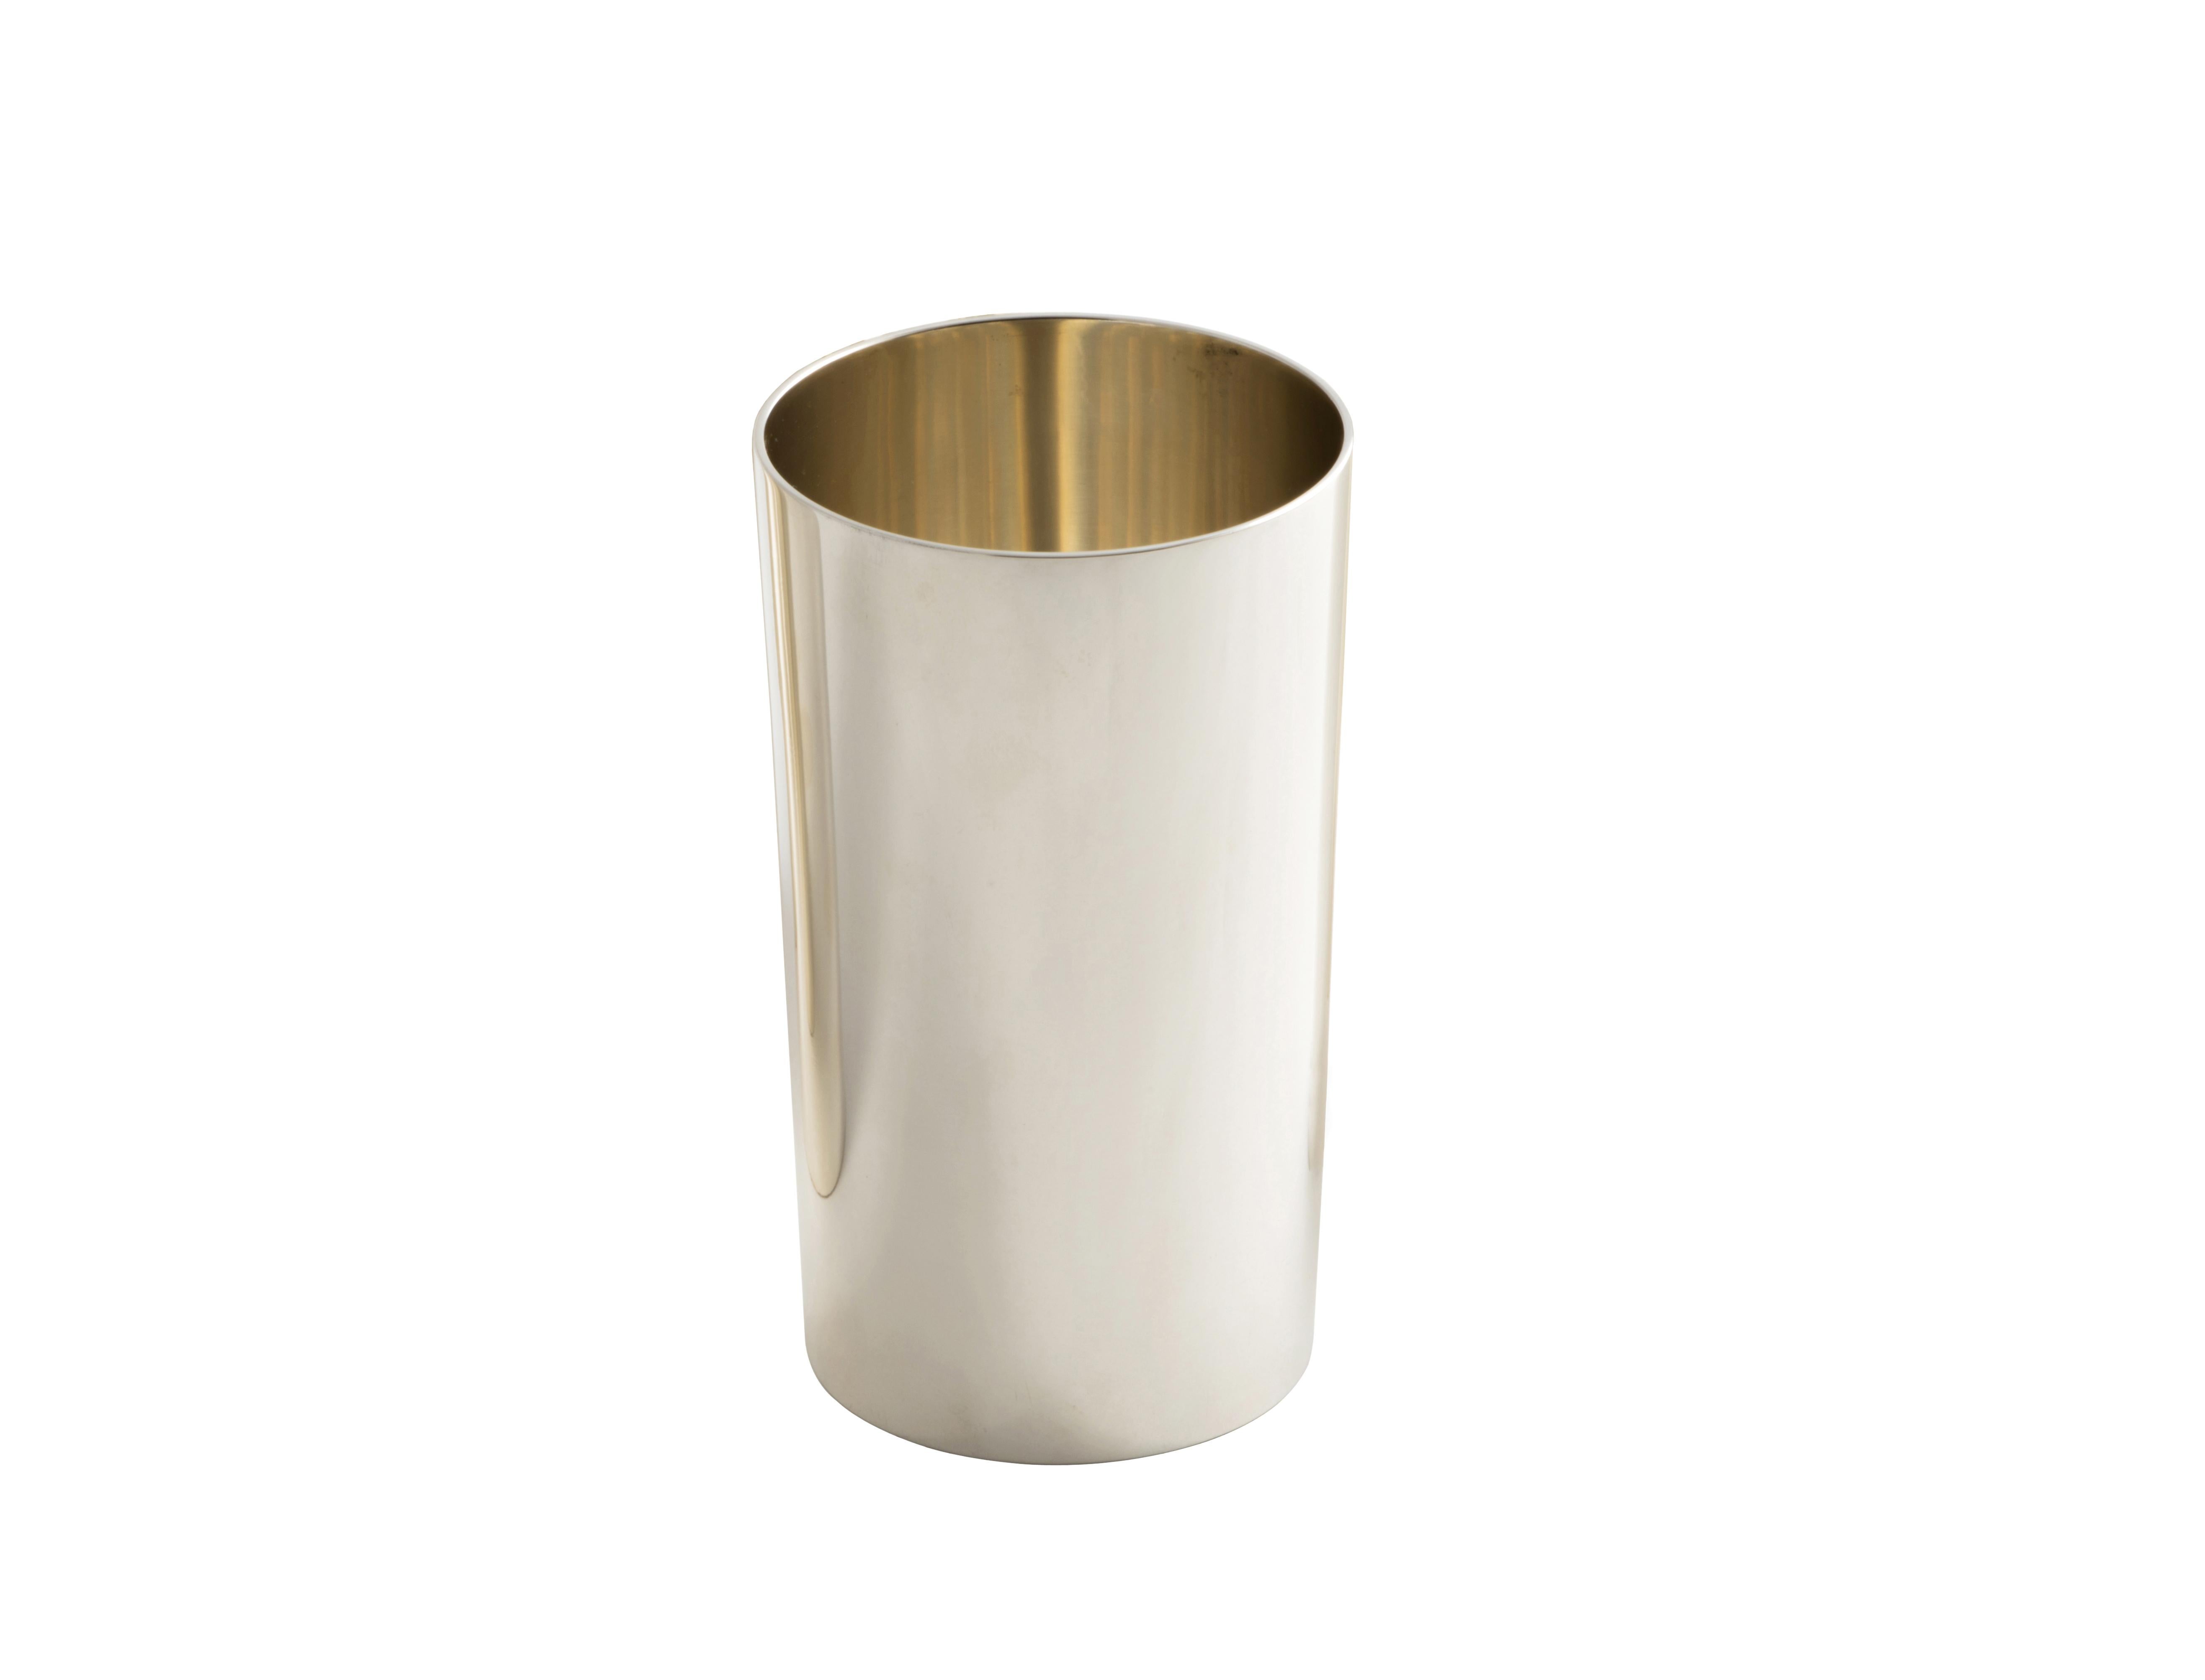 A flawlessly modern mint julep cup / highball tumbler in sterling silver by Tiffany. Its Spartan form and exceptional weight provide for an incredible feel in the hand. It also makes for a beautiful bud vase. Incredibly clean (likely never used) and